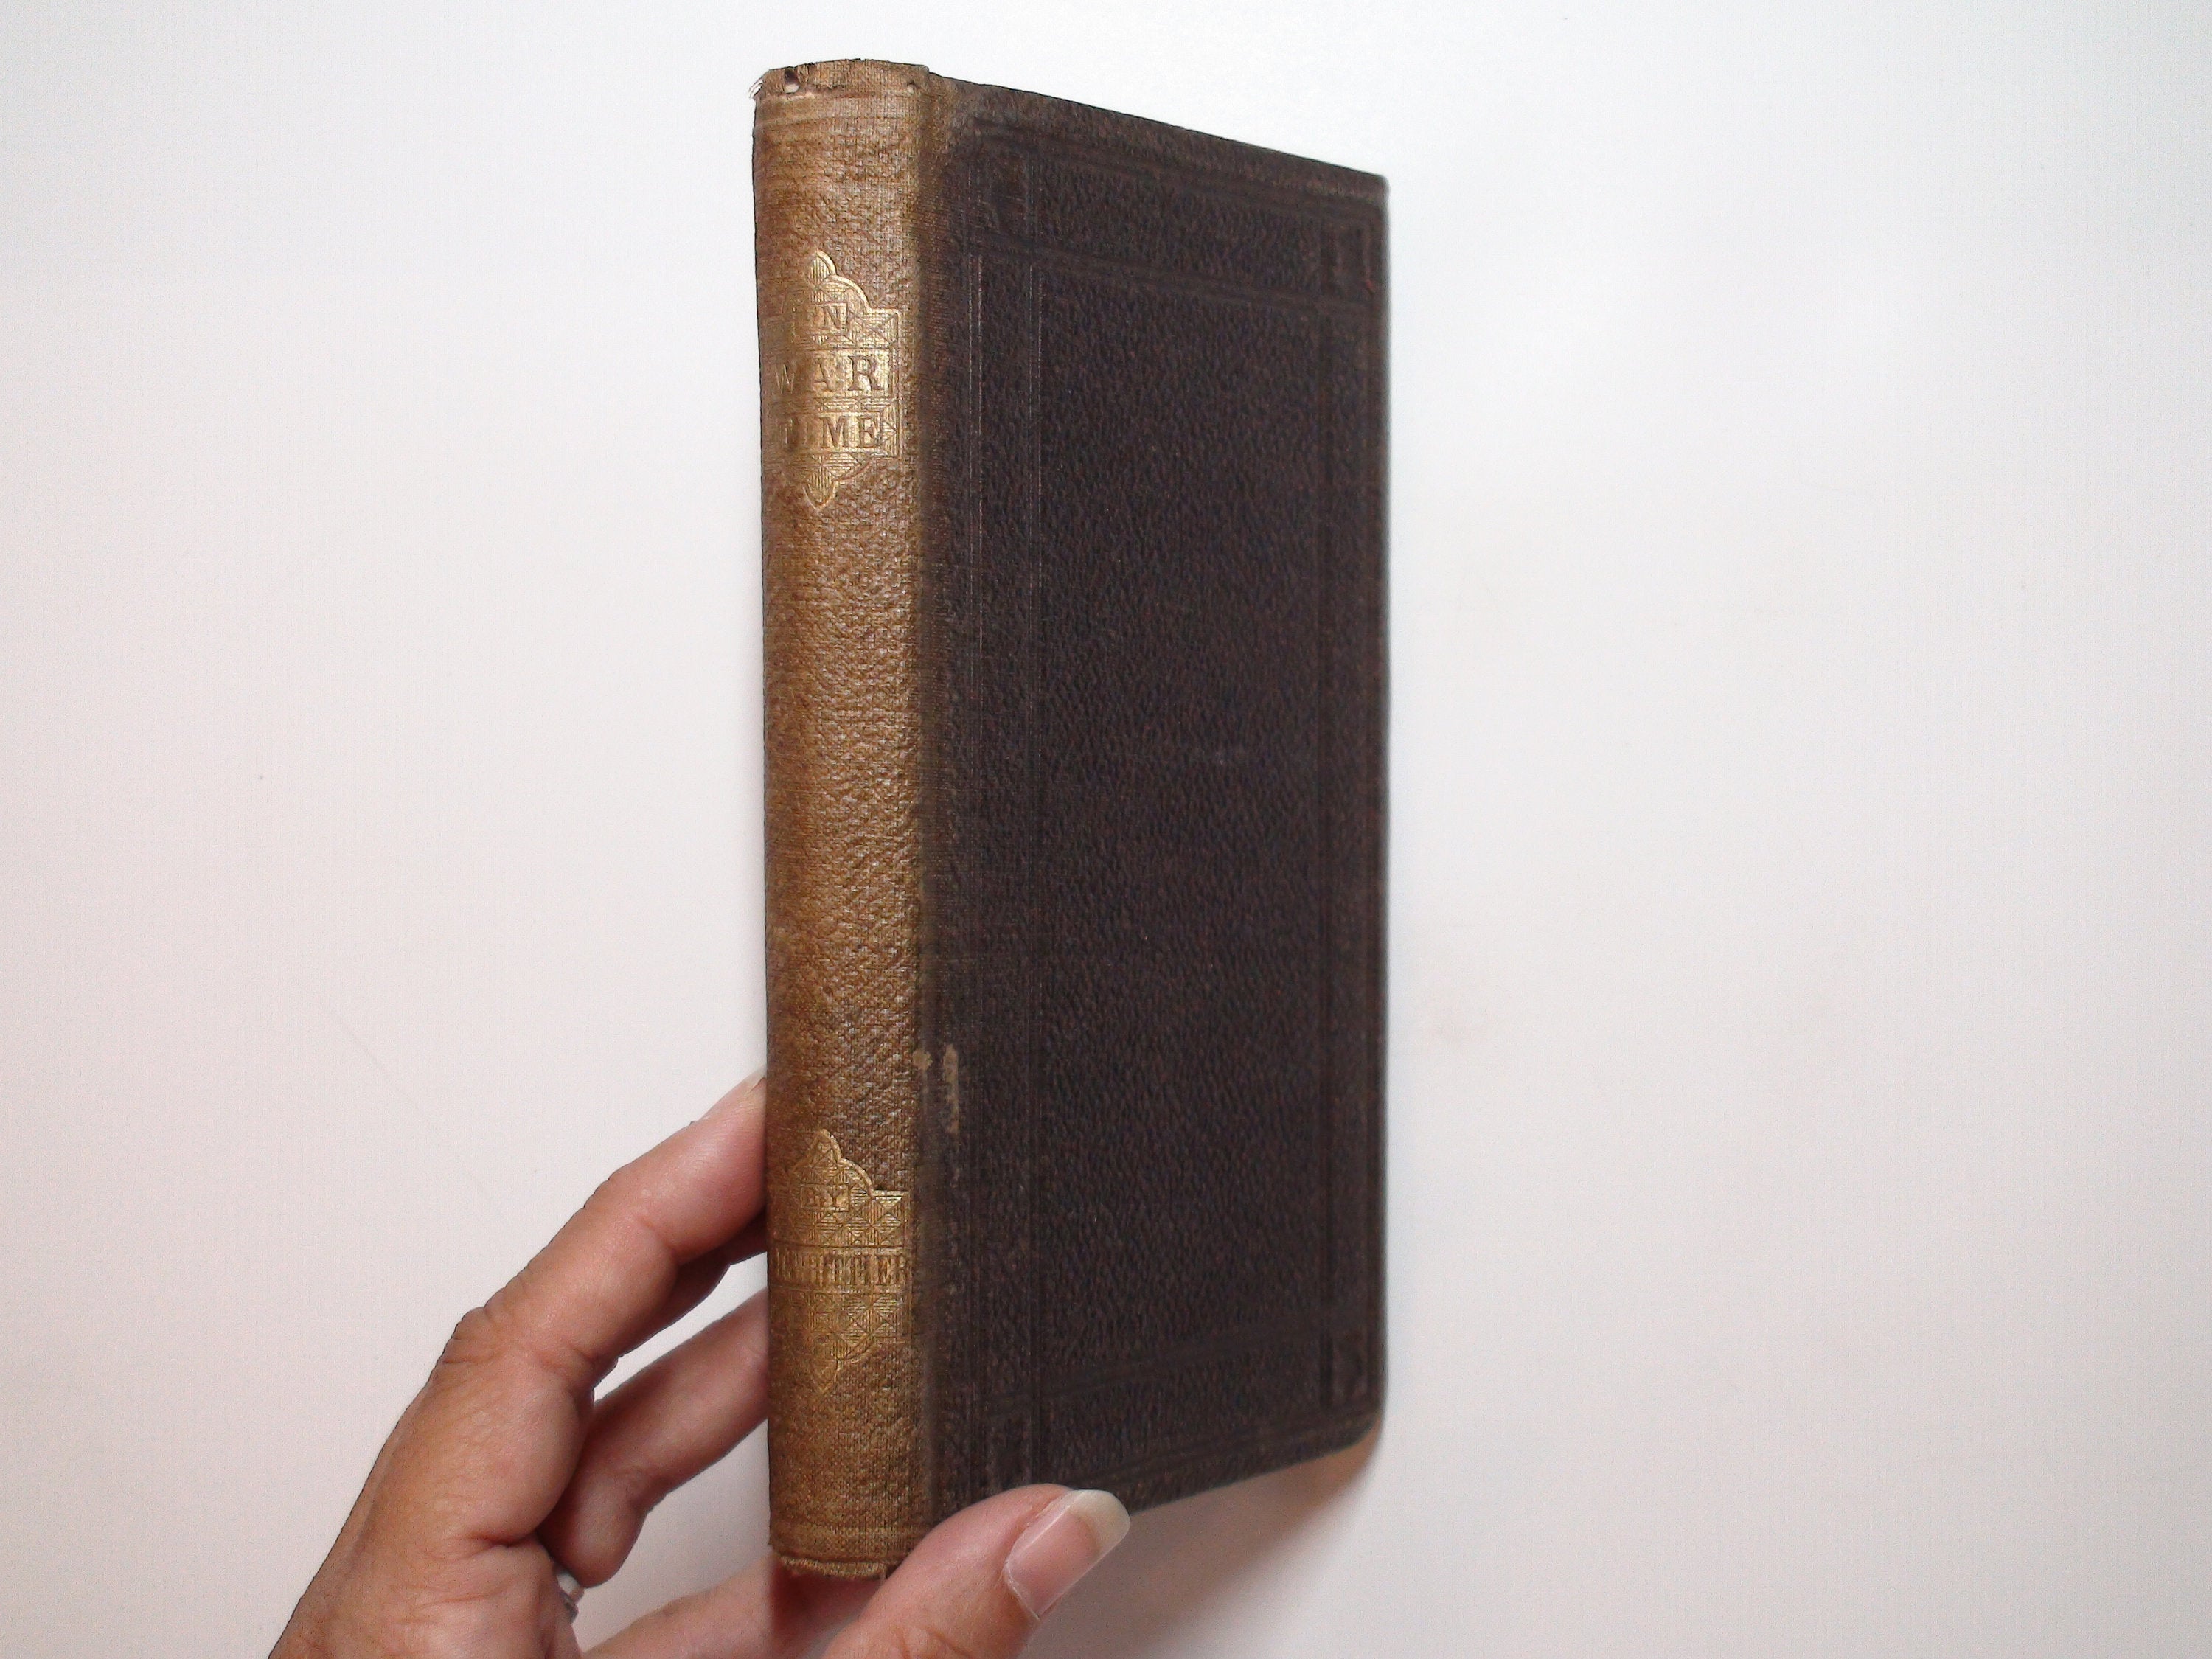 In War Time and Other Poems by John Greenleaf Whittier, 1st Ed, 1864